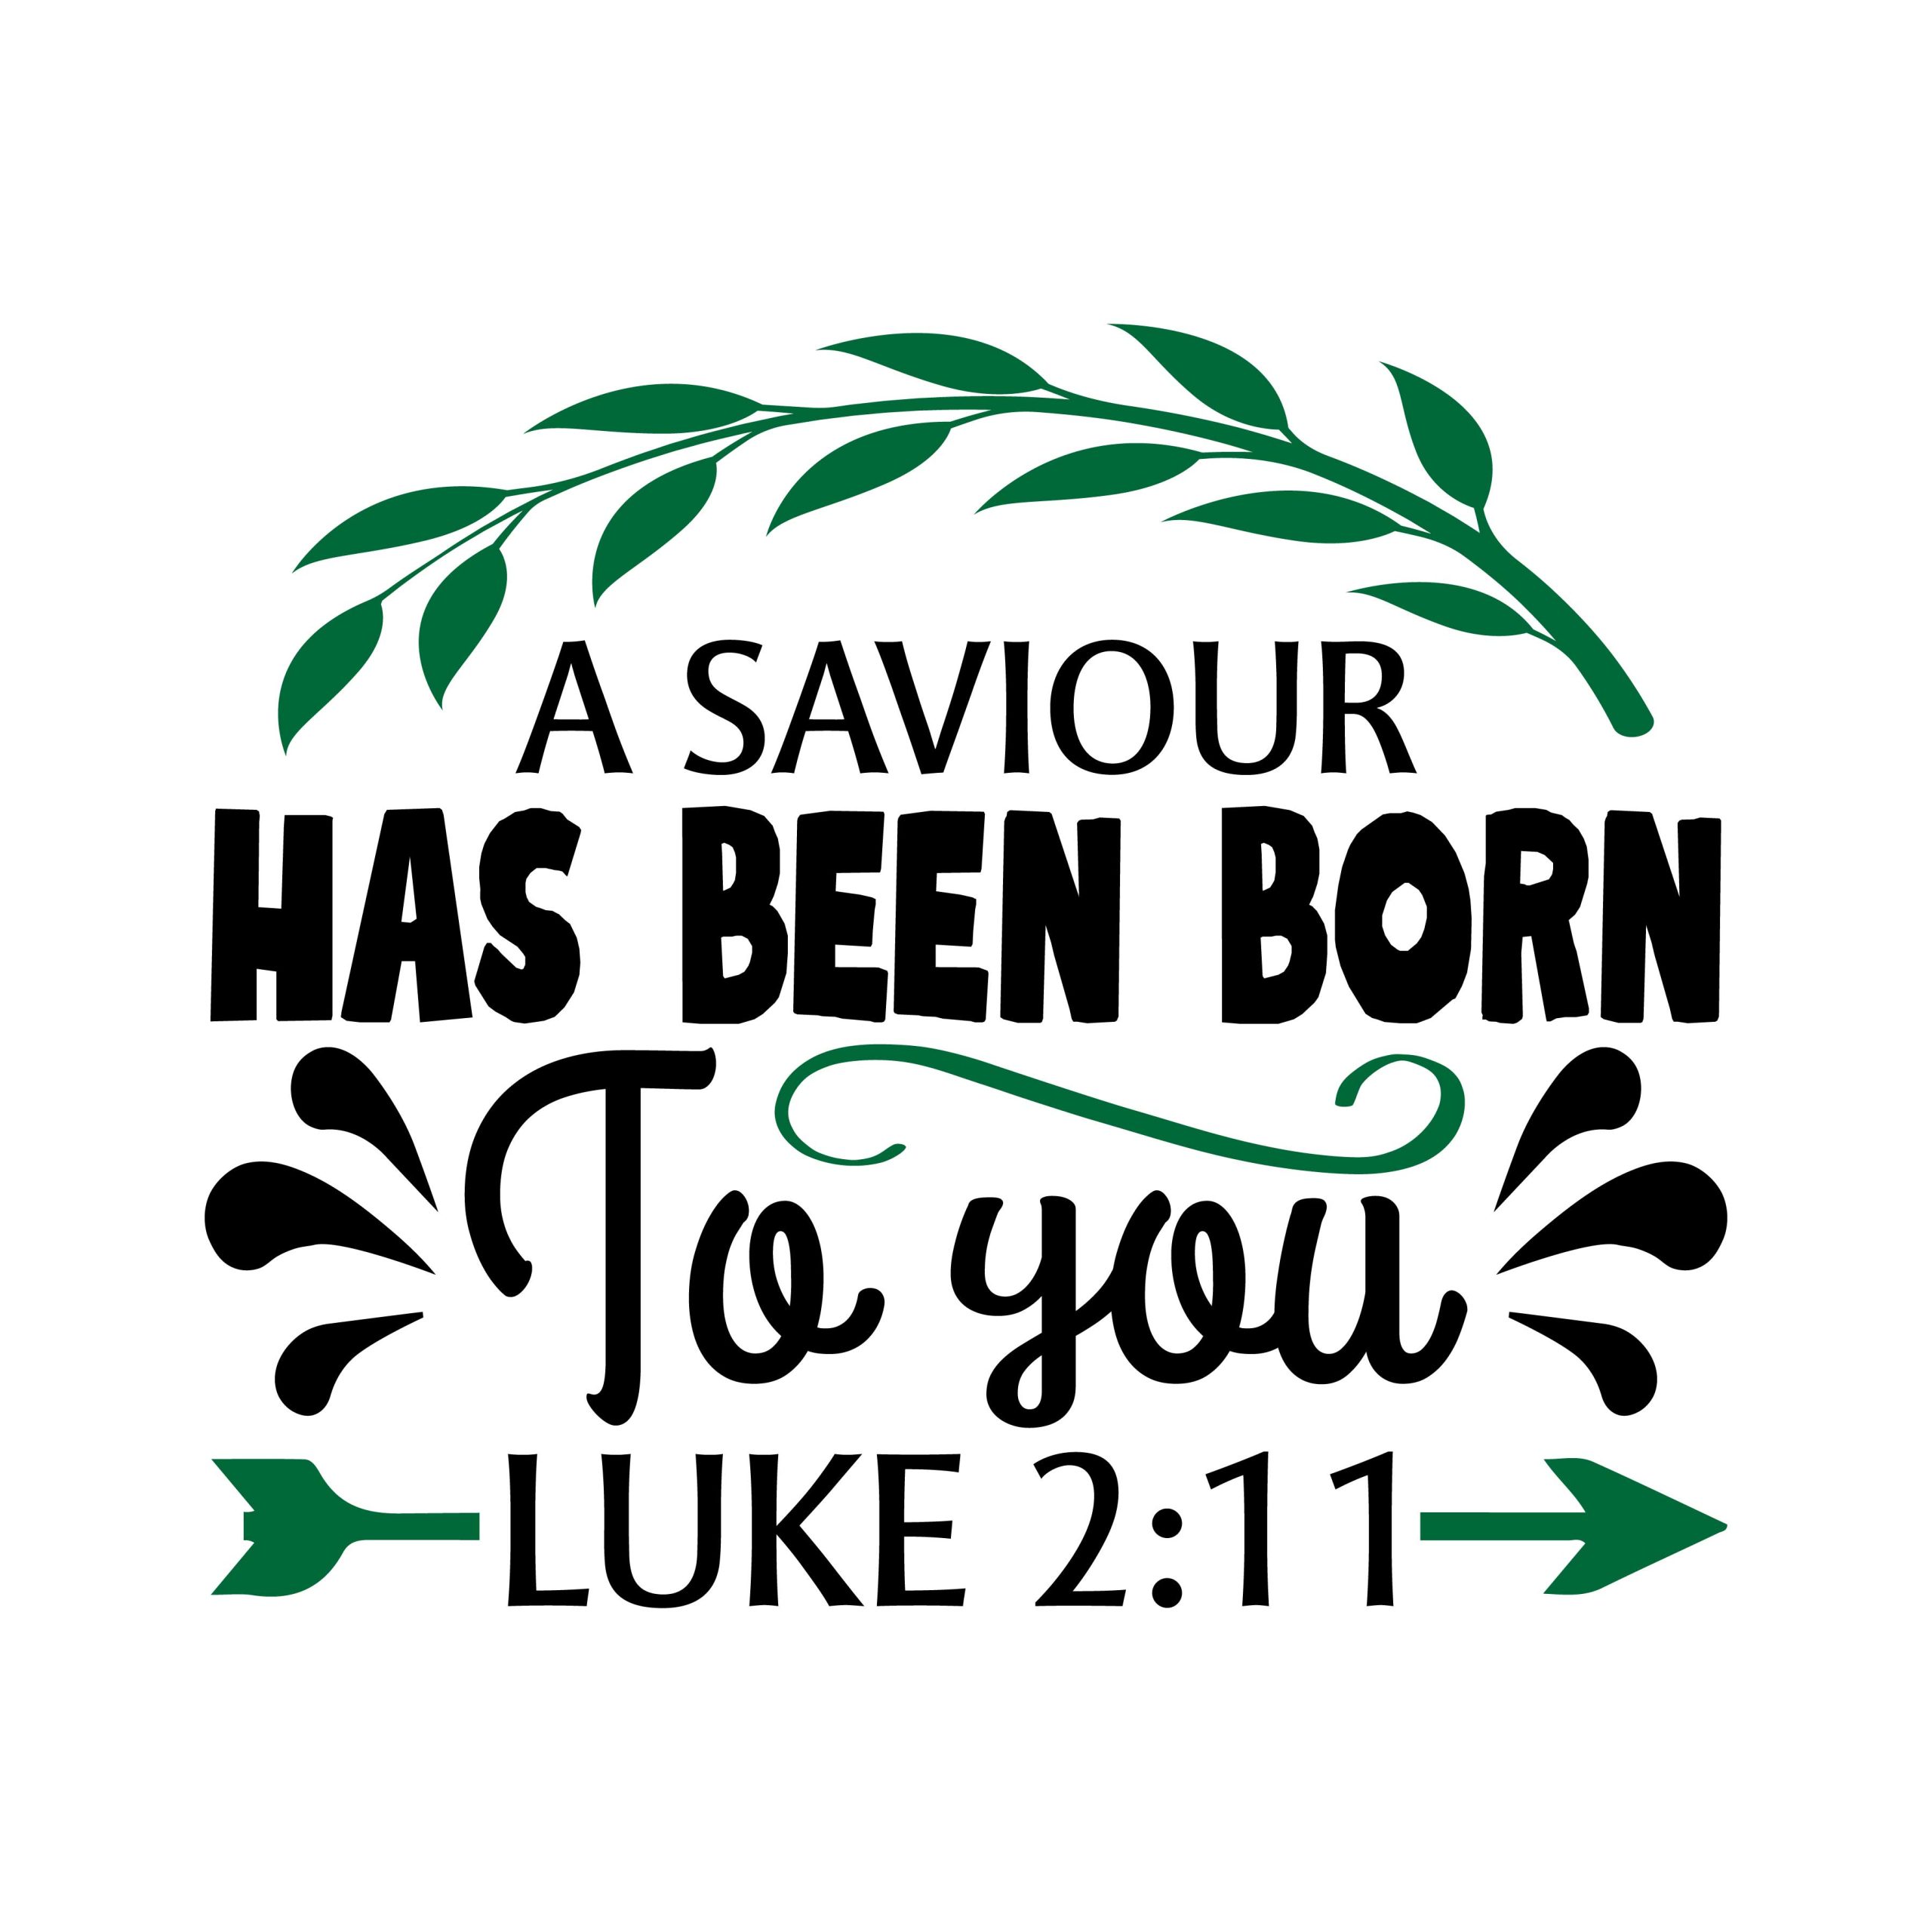 A saviour has been born to you Luke 2:11, bible verses, scripture verses, svg files, passages, sayings, cricut designs, silhouette, embroidery, bundle, free cut files, design space, vector